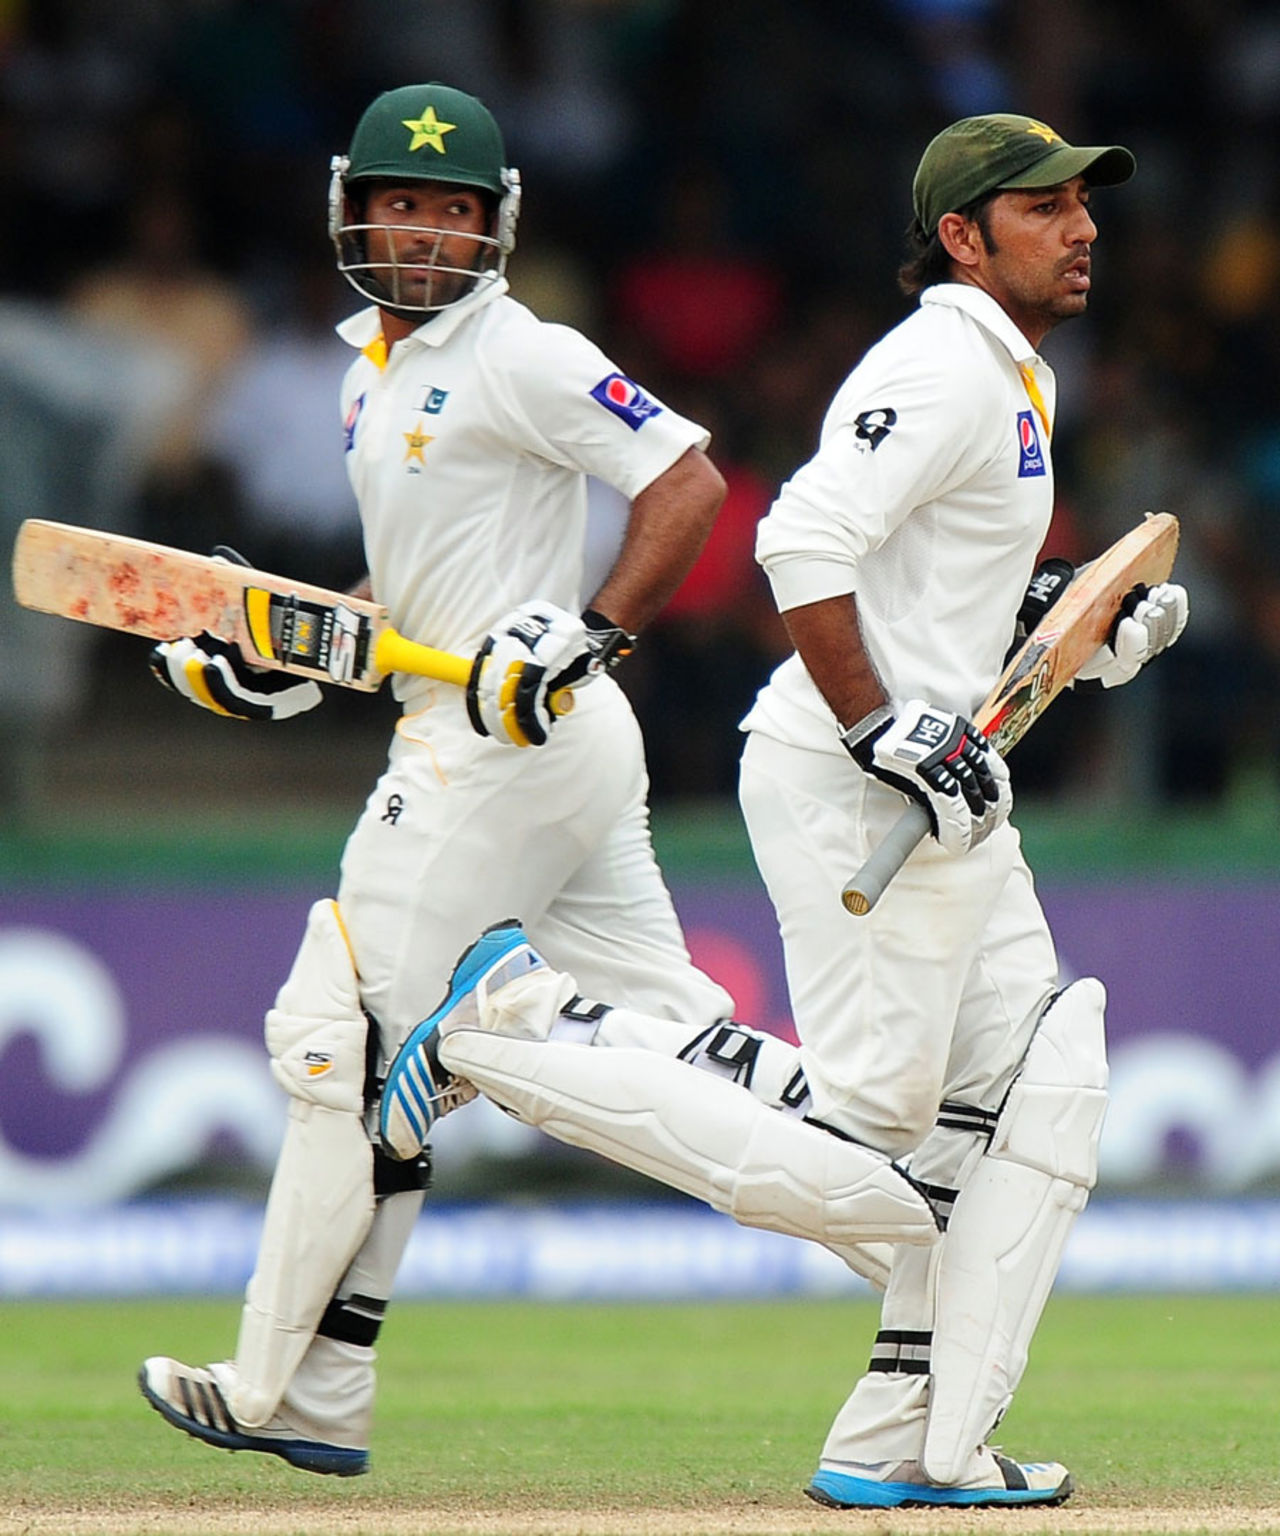 Asad Shafiq and Sarfraz Ahmed put up some brief resistance with a 55-run stand, Sri Lanka v Pakistan, 2nd Test, Colombo, 4th day, August 17, 2014